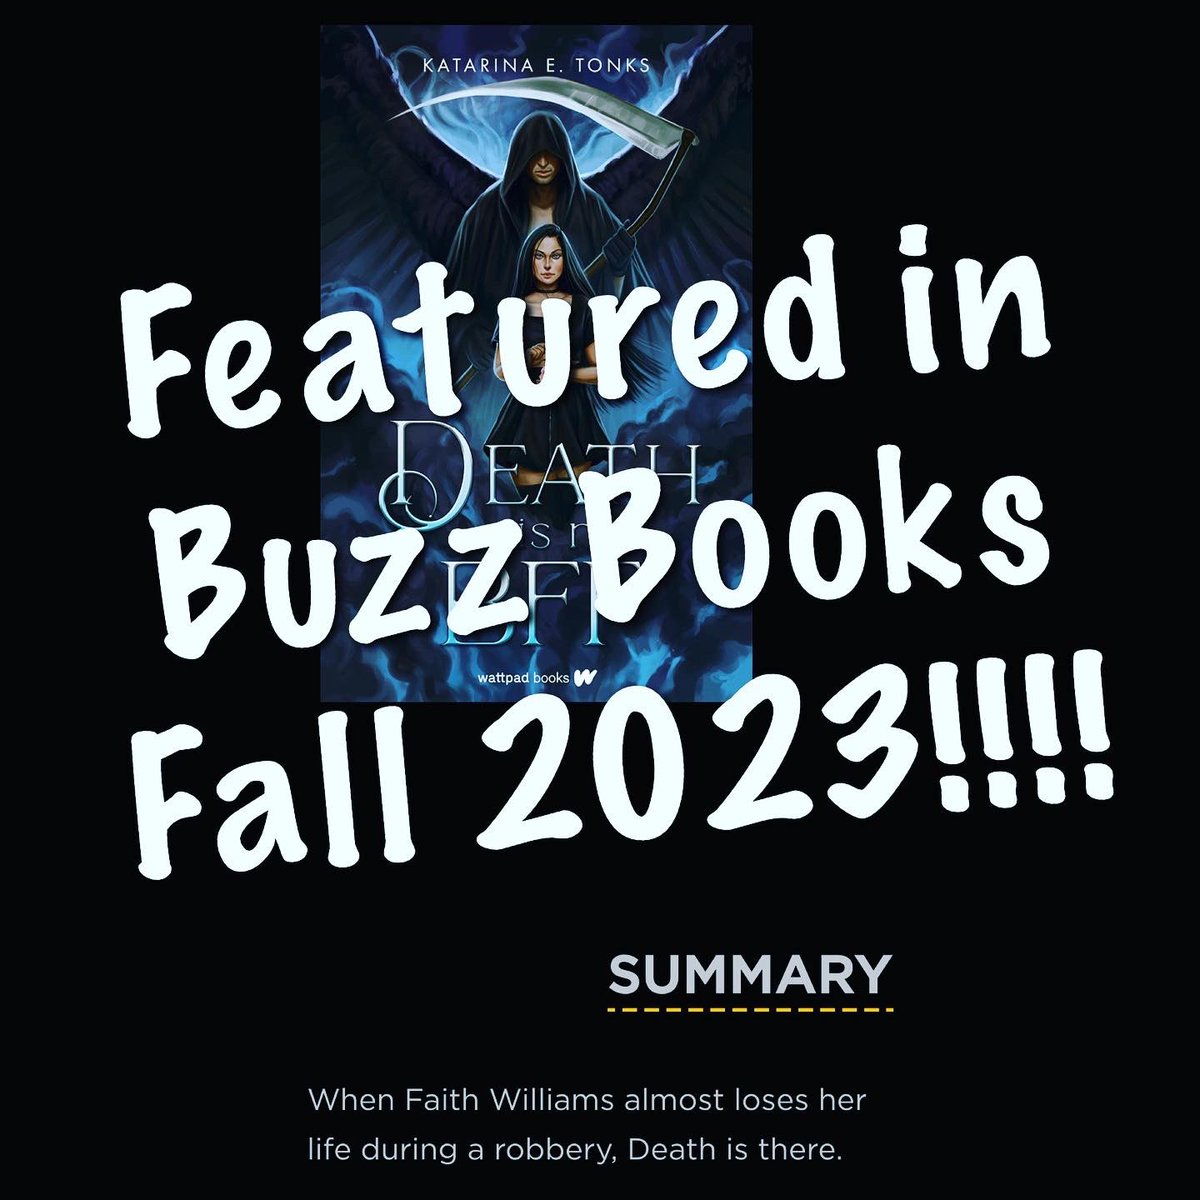 DEATH IS MY BFF by @katrocks247 is one of Publisher Lunch’s Buzz Books 2023: Fall/Winter! An excerpt is included in #BuzzBooks2023! buzz.publishersmarketplace.com